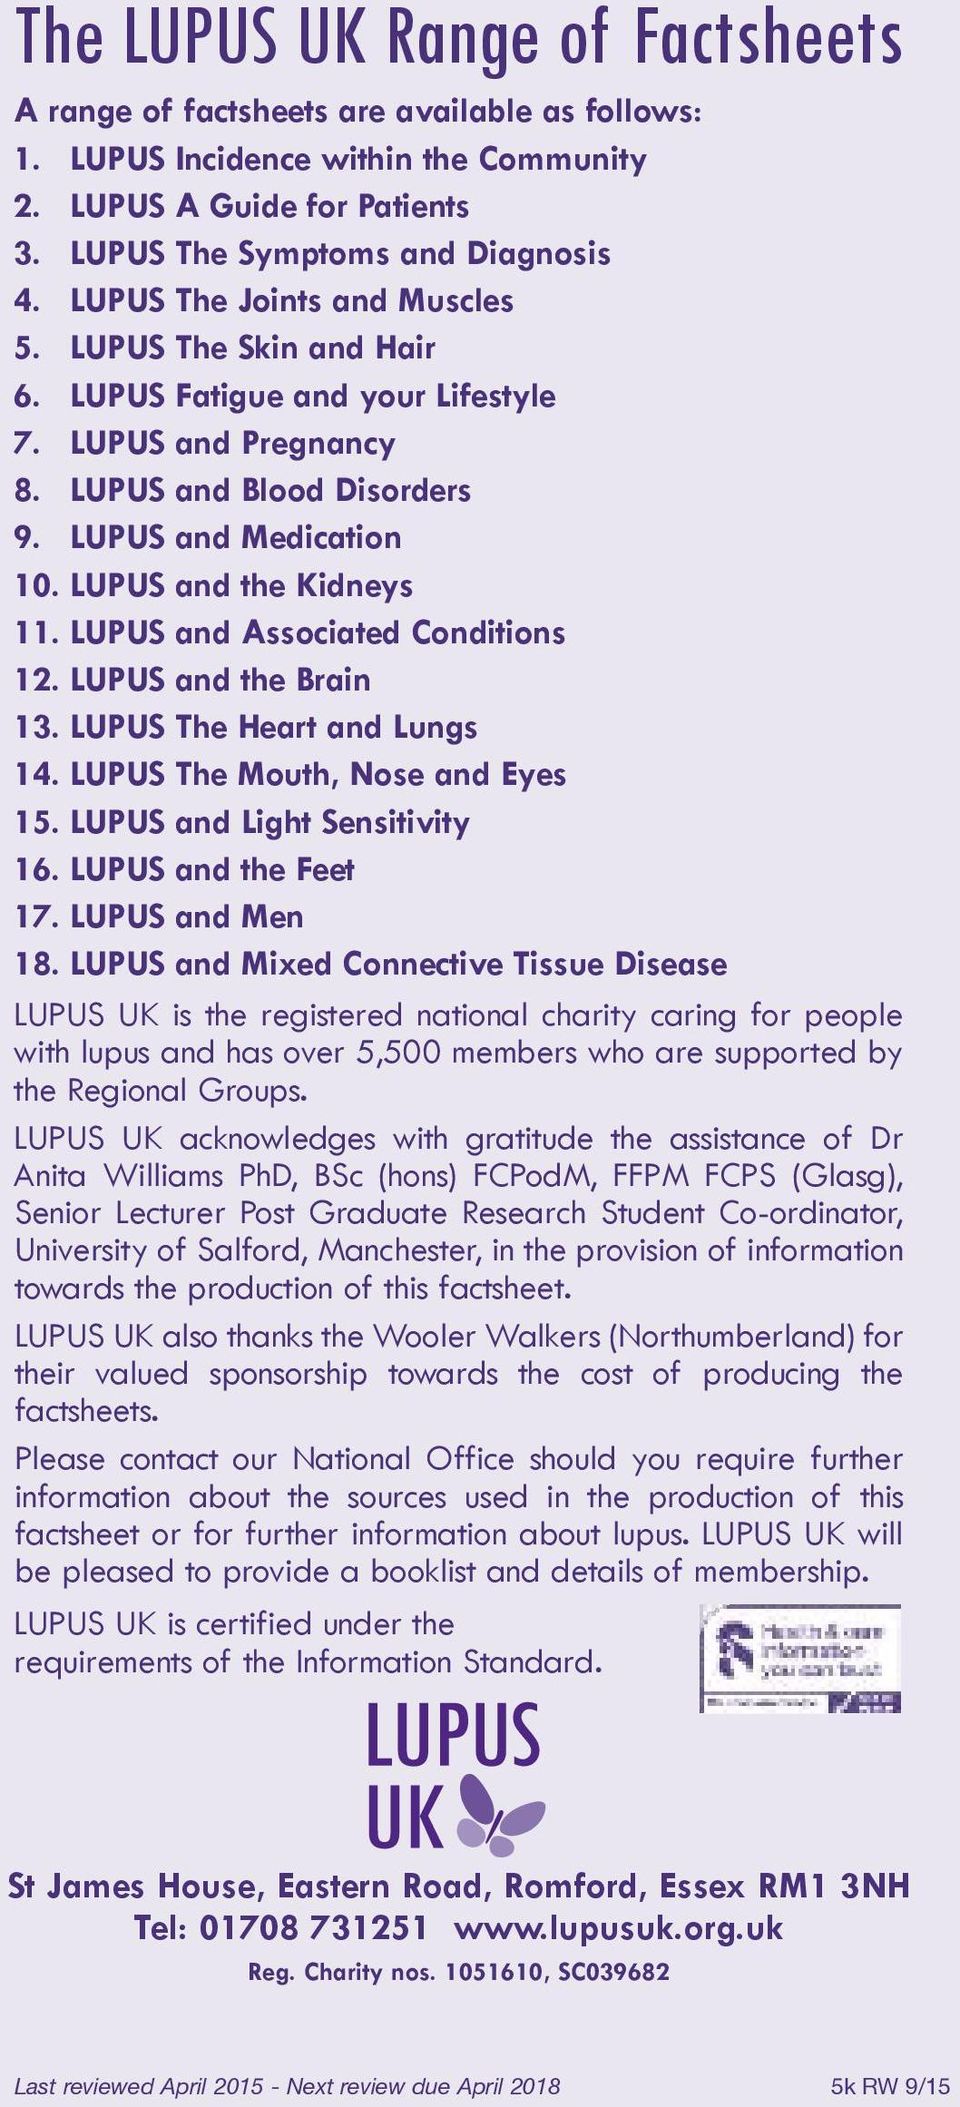 LUPUS and Associated Conditions 12. LUPUS and the Brain 13. LUPUS The Heart and Lungs 14. LUPUS The Mouth, Nose and Eyes 15. LUPUS and Light Sensitivity 16. LUPUS and the Feet 17. LUPUS and Men 18.